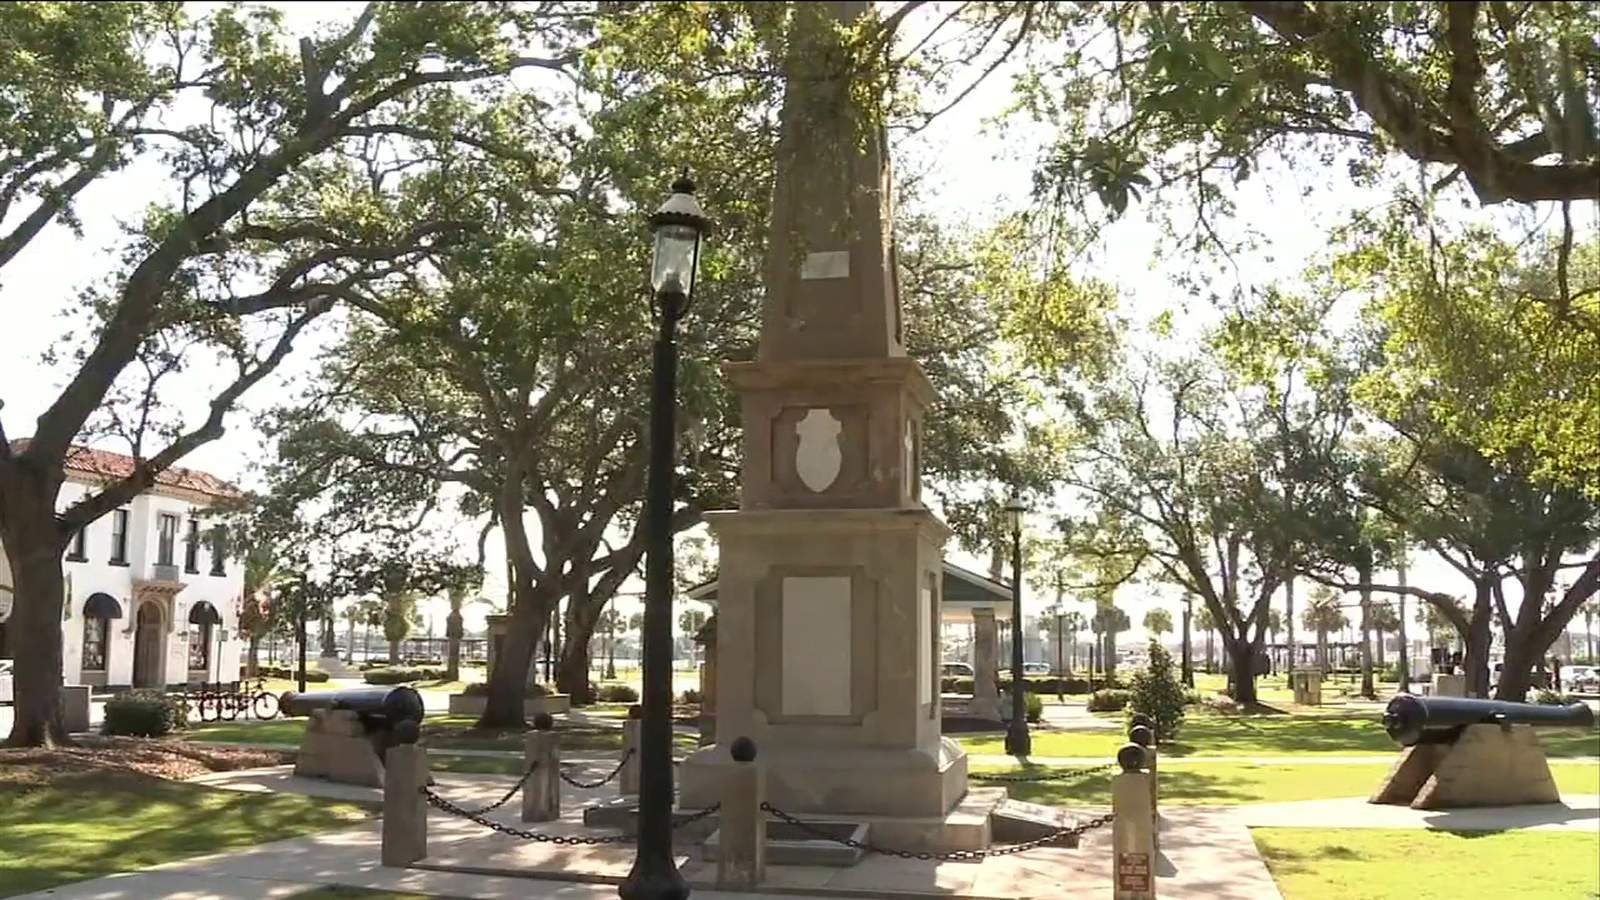 In Americas oldest city, a reckoning over Confederate past